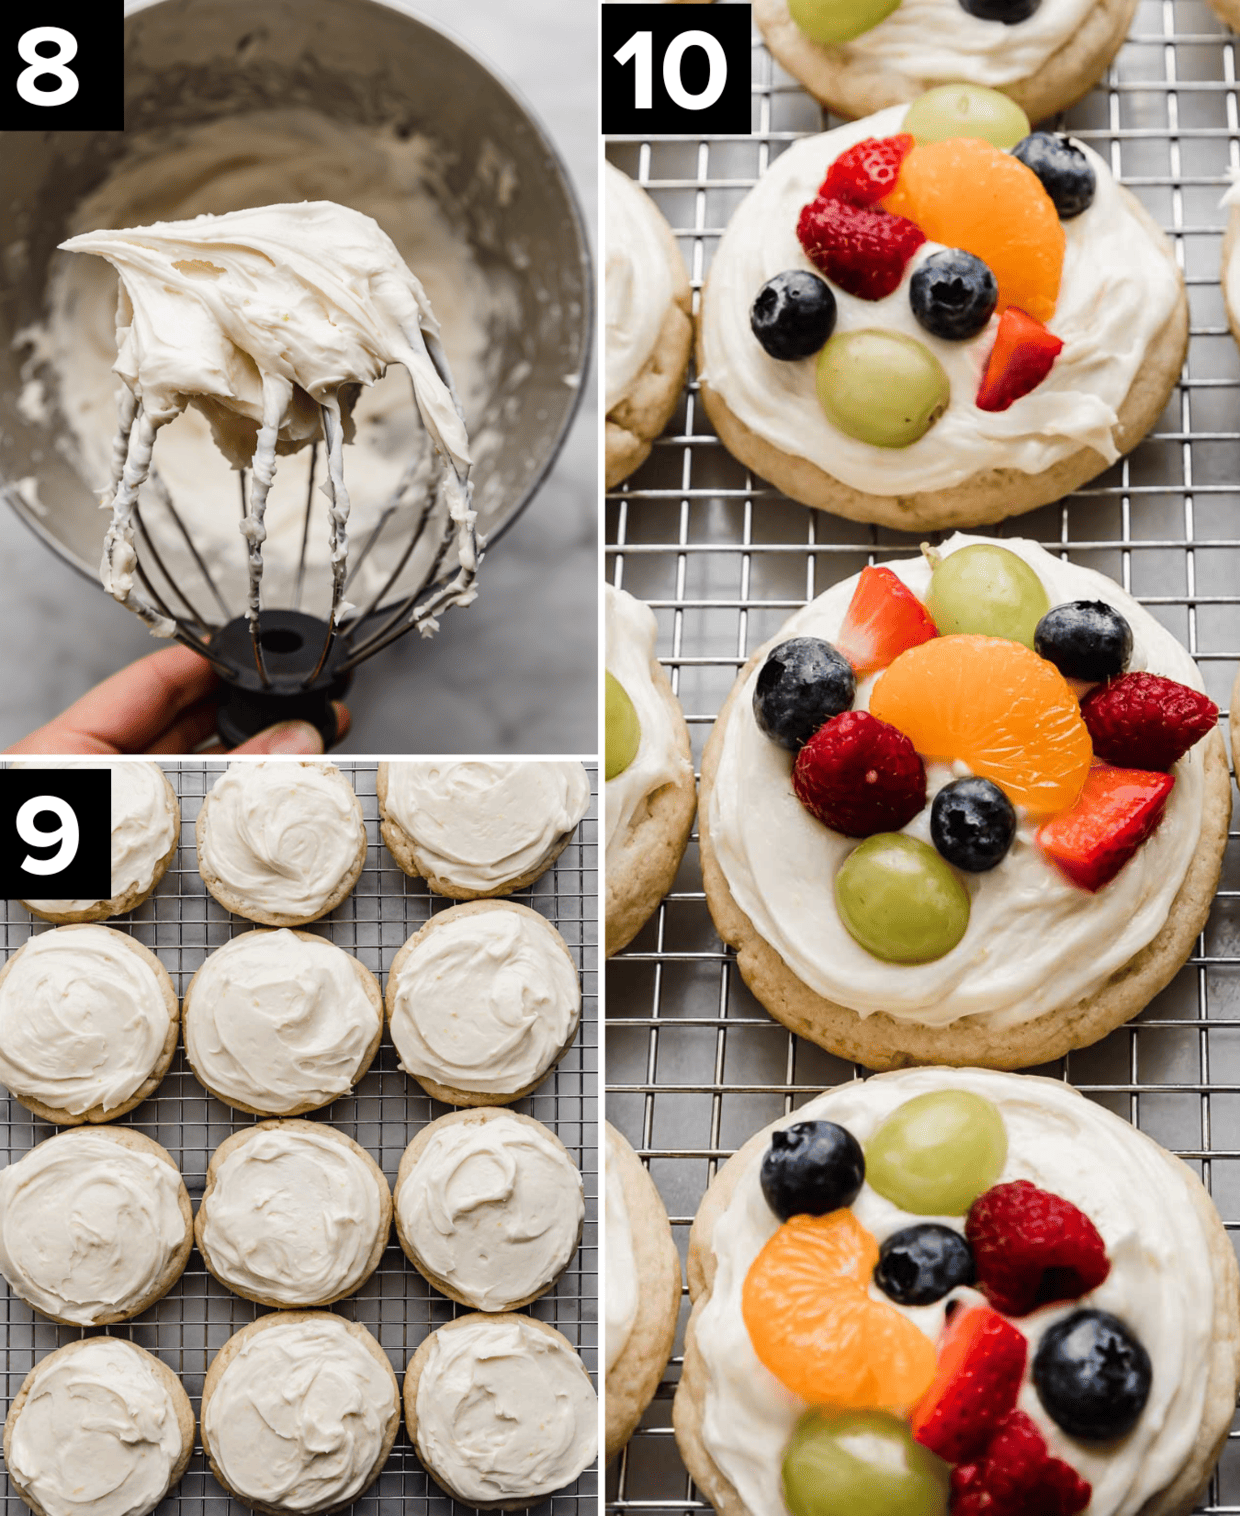 Three photos, top left is cream cheese frosting on a wire whisk, bottom left is white frosting topped cookies, right photo is Fruit Pizza Cookies topped with fresh fruit: raspberries, blueberries, grapes, and mandarin oranges.